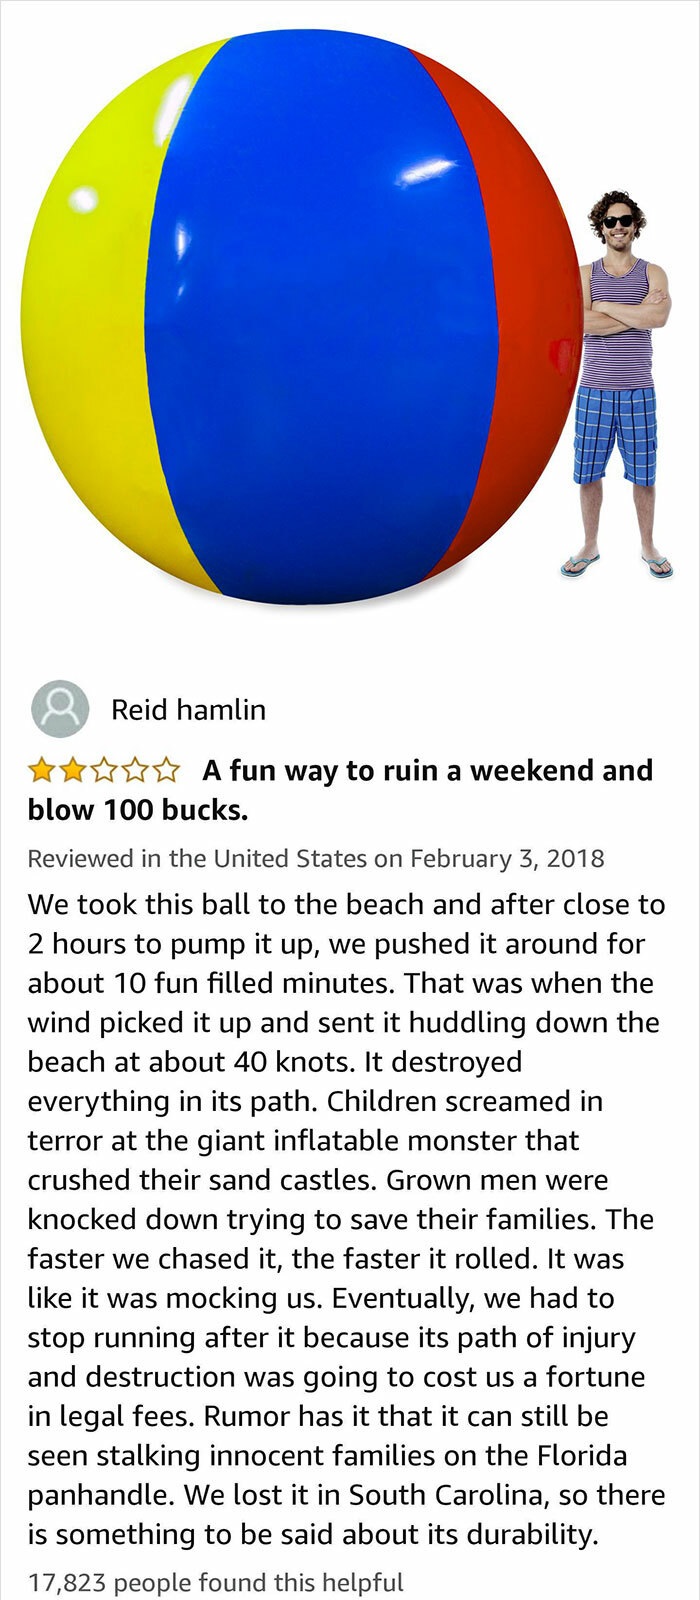 funny amazon reviews - A fun way to ruin a weekend and blow 100 bucks. - We took this ball to the beach and after close to 2 hours to pump it up, we pushed it around for about 10 fun filled minutes. That was when the wind picked it up…